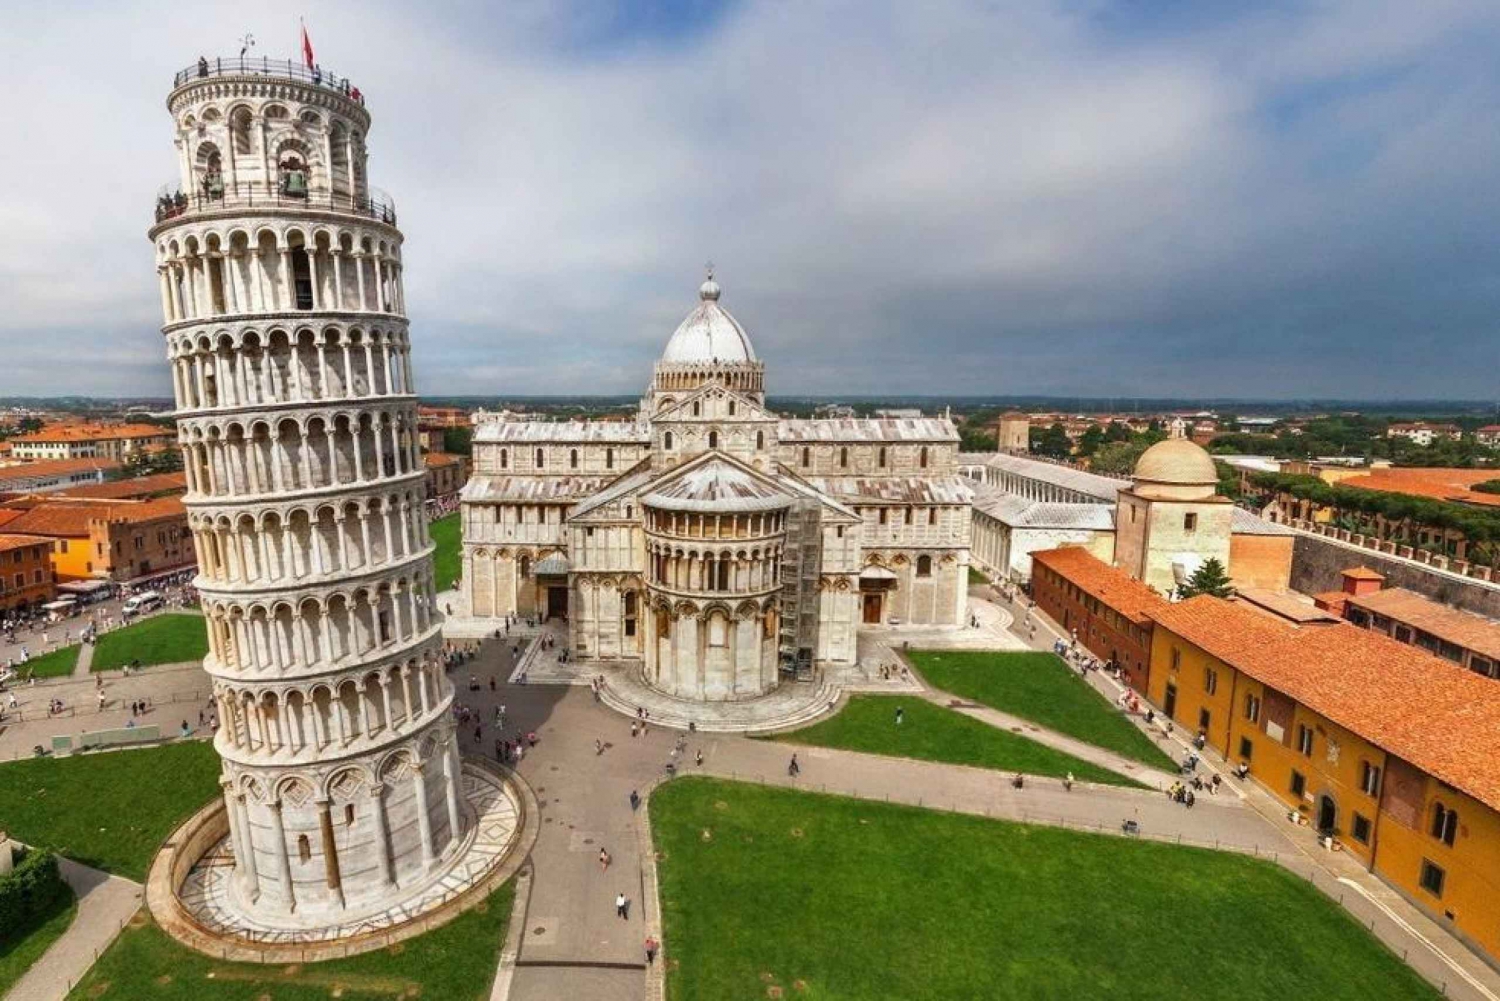 Leaning Tower of Pisa: Exclusive Half-Day Trip from Florence